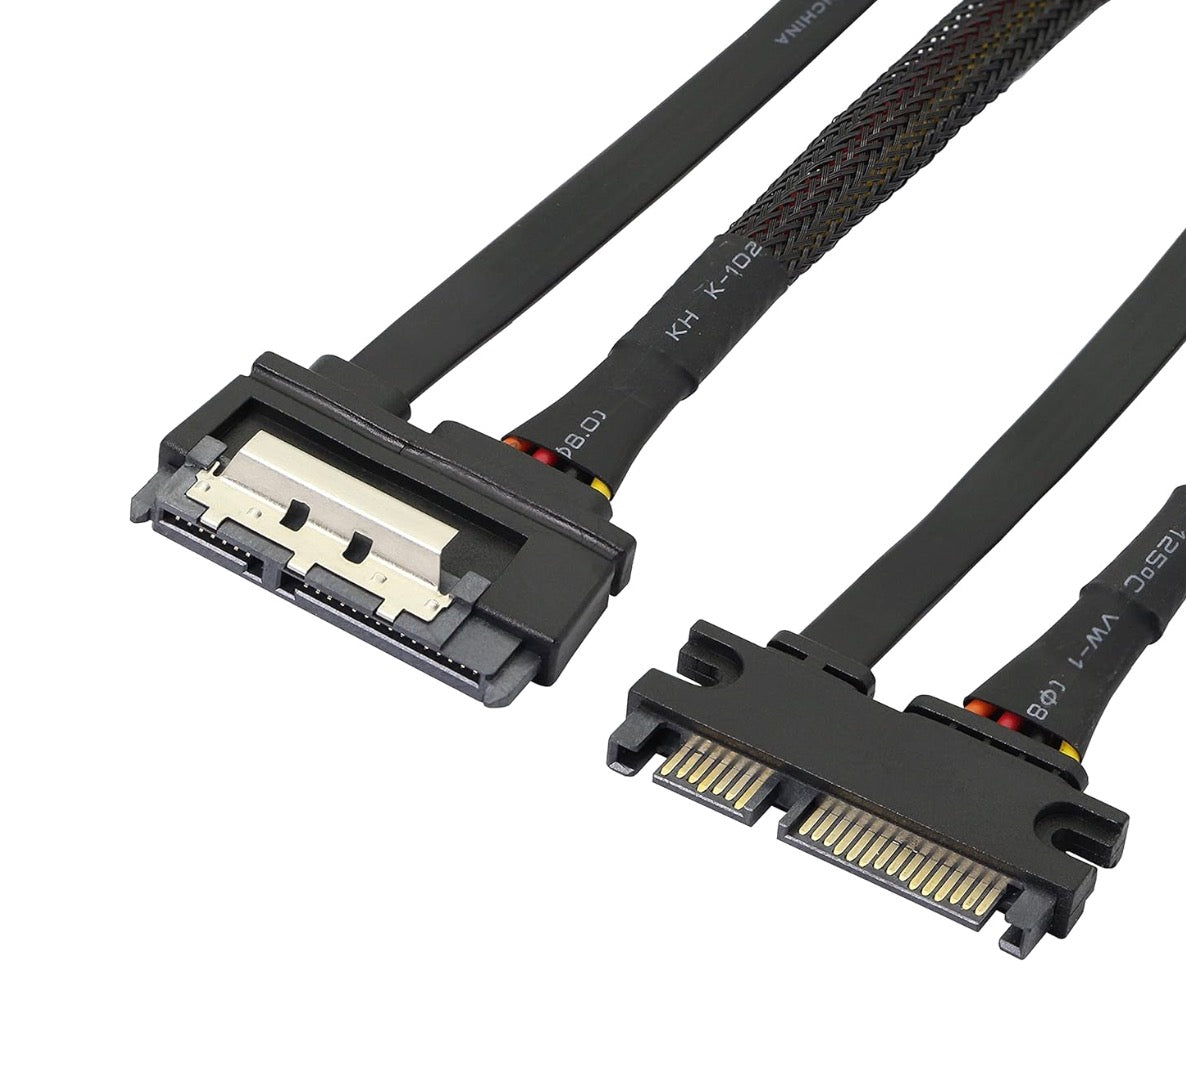 Sata 22Pin Male to Female Data Power Extension Cable for HDD,SSD,Optical Drives, DVD Burners, PCI Cards